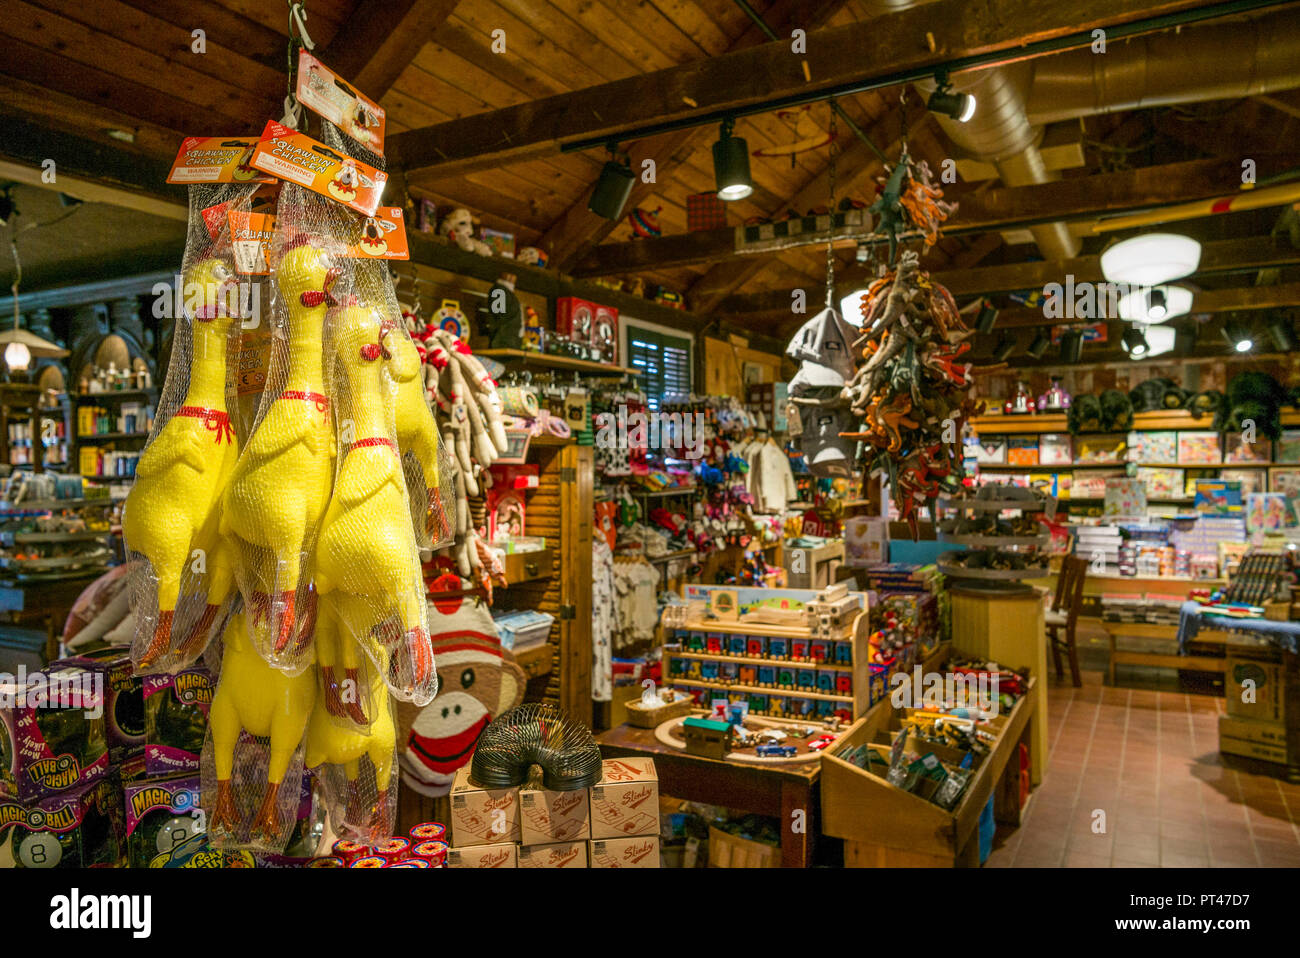 USA, New England, Vermont, Rockingham, The Vermont Country Store, interior with rubber chicken novelty toys Stock Photo